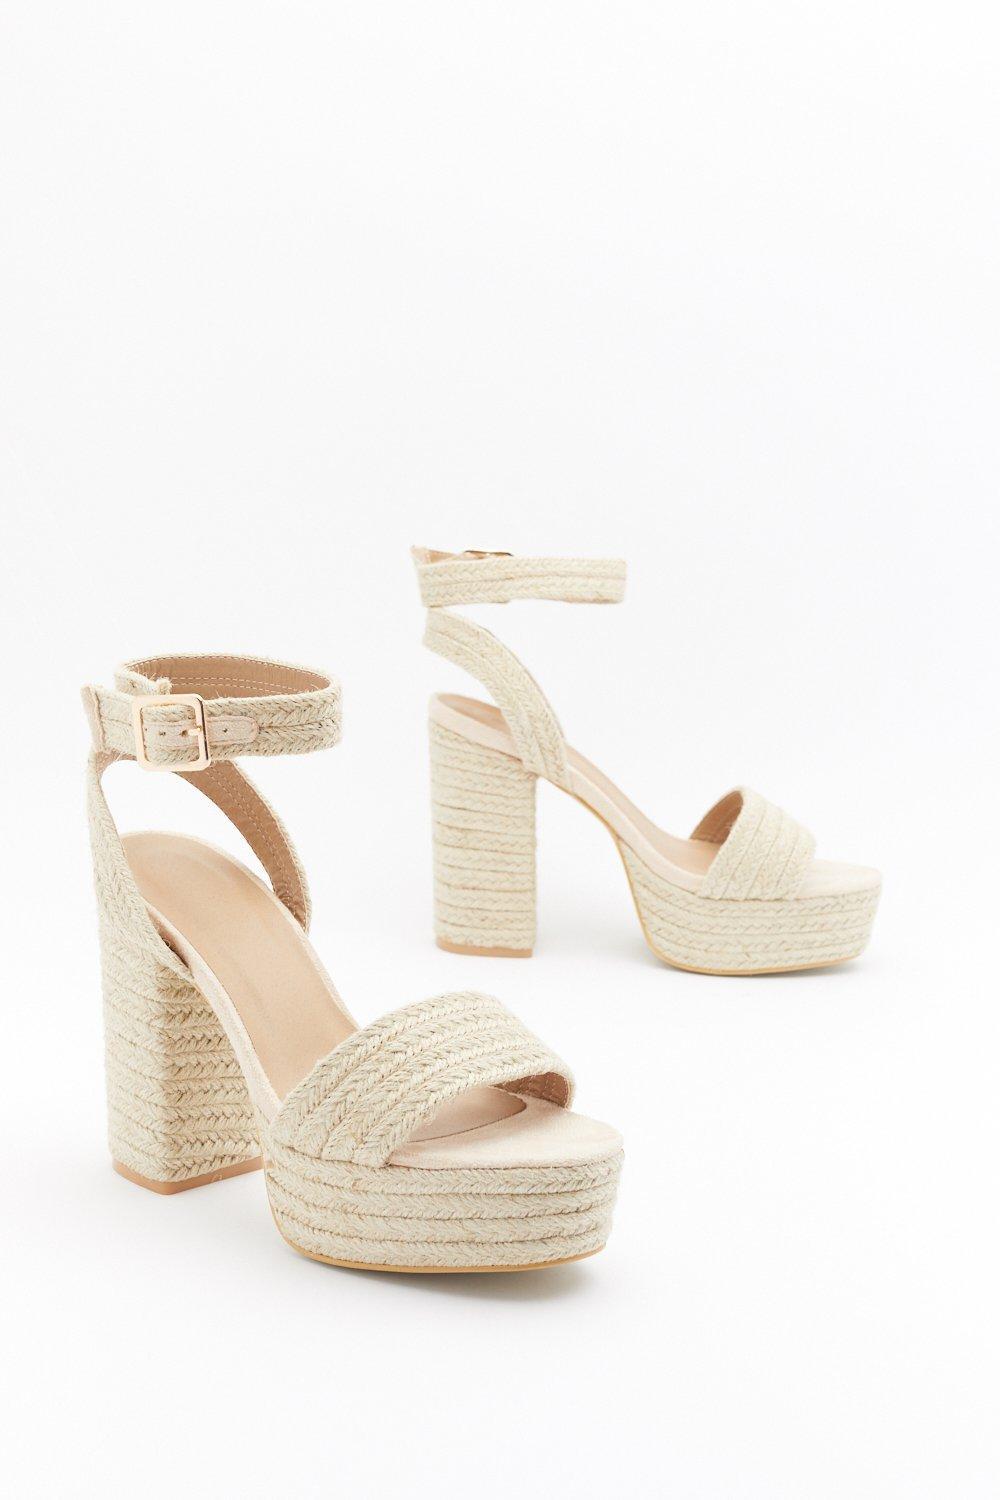 Nasty Gal "step Right Up Woven Platform Heels" in Natural | Lyst